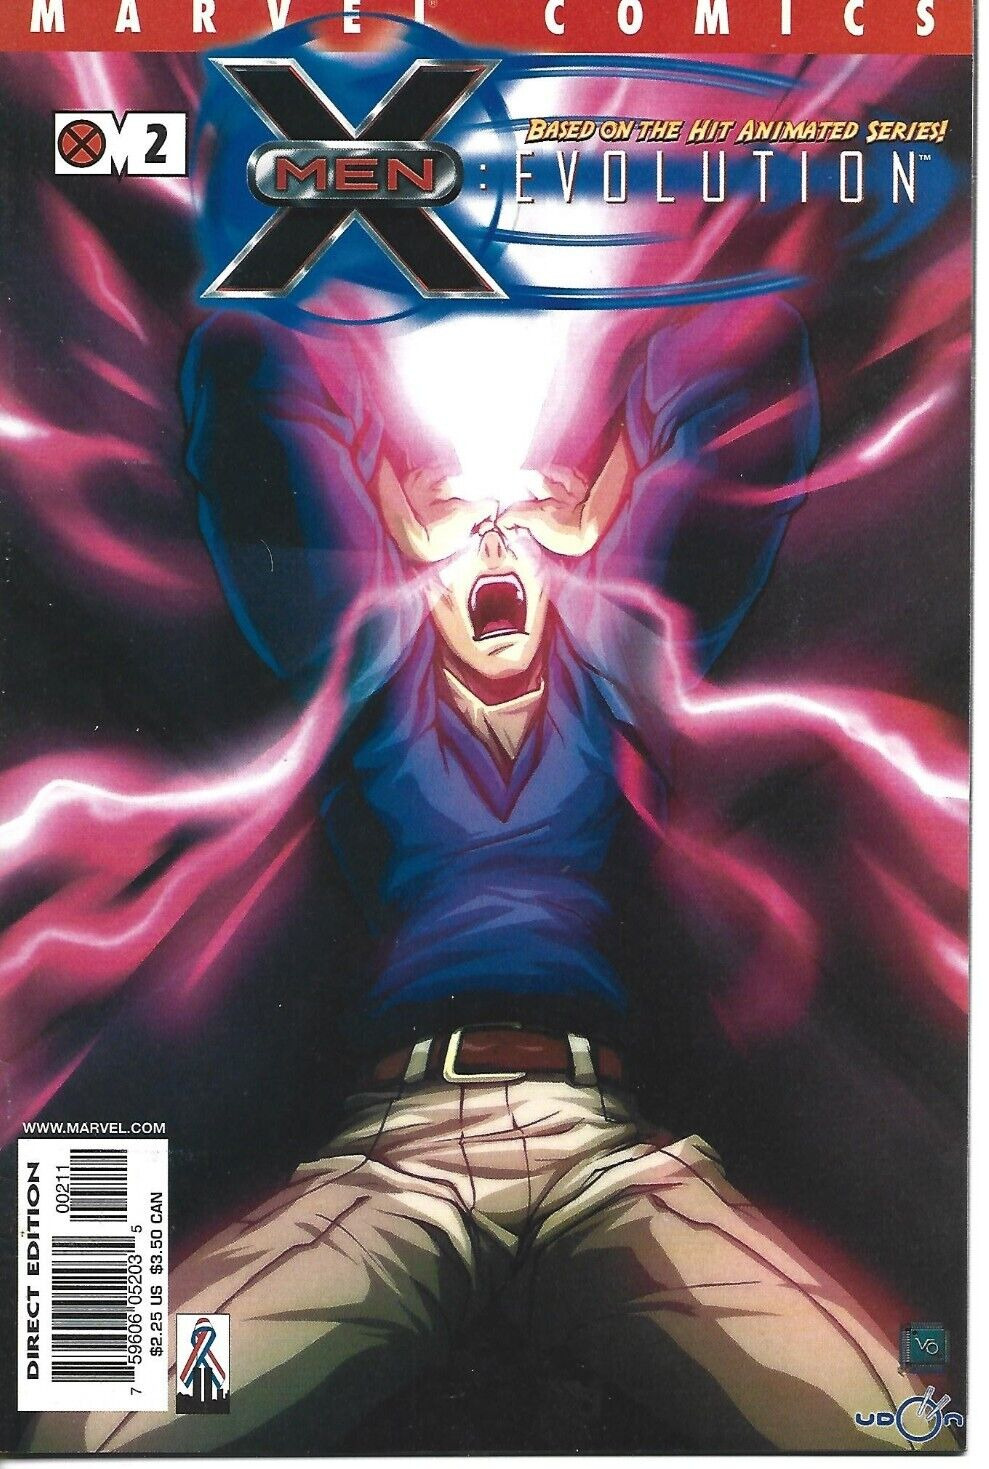 X-MEN EVOLUTION #2 MARVEL COMICS 2002 BAGGED AND BOARDED